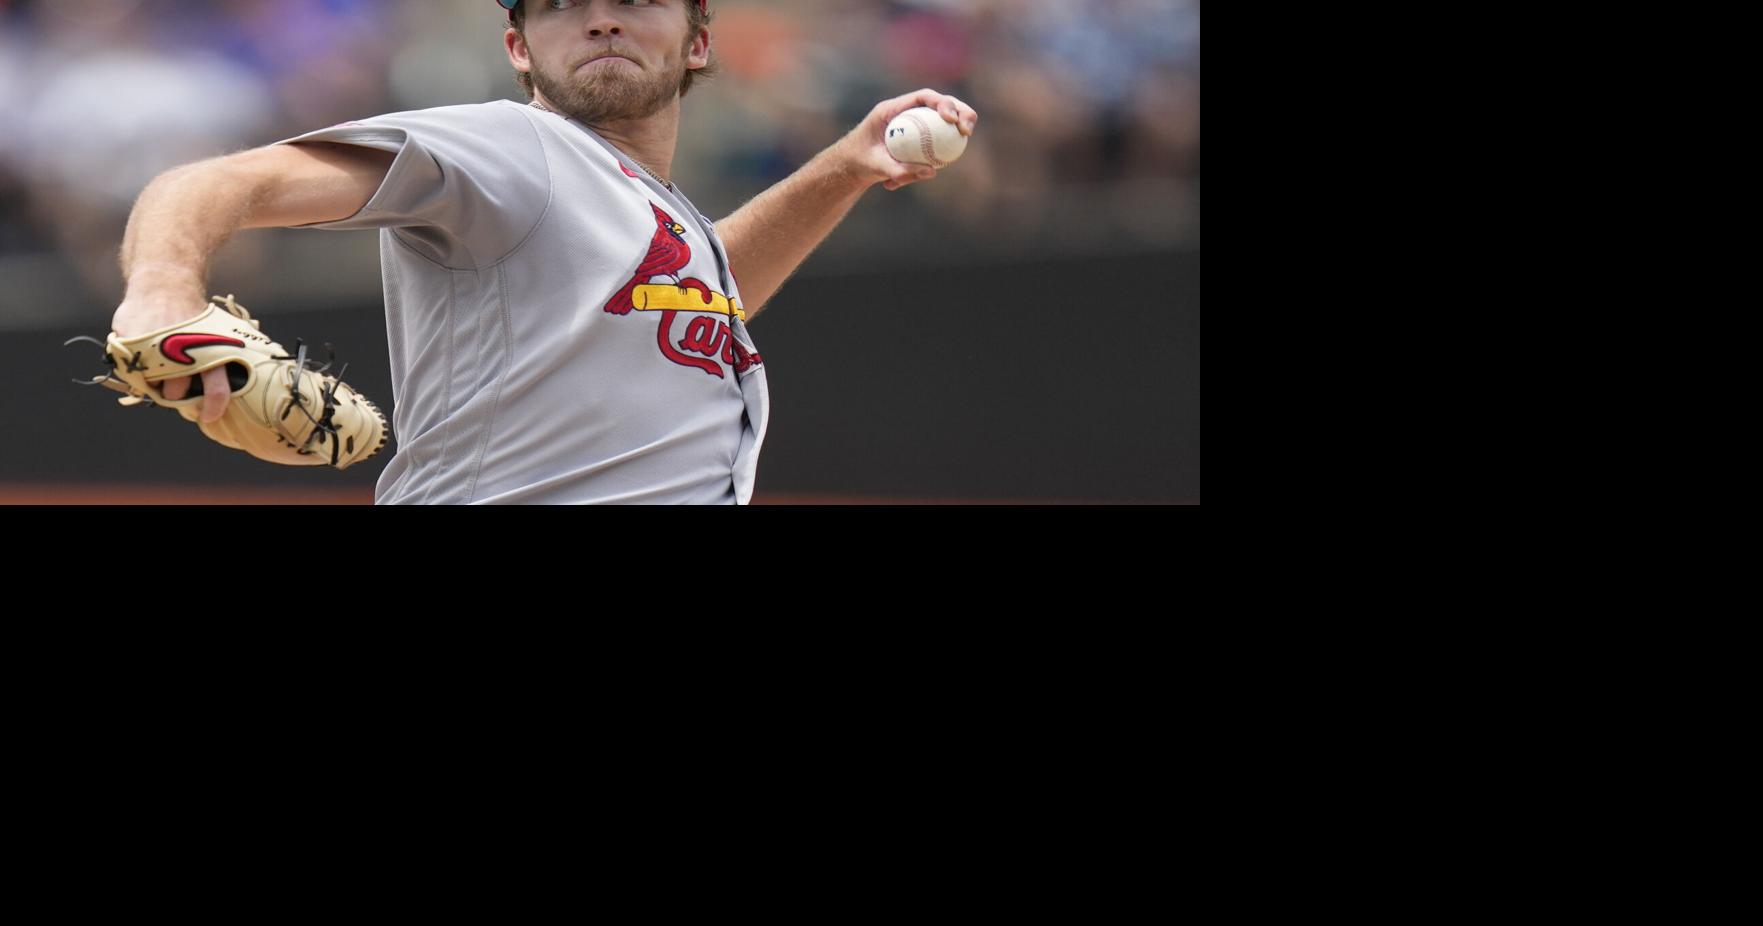 Gorman, Liberatore to join Cardinals; O'Neill placed on 10-day IL